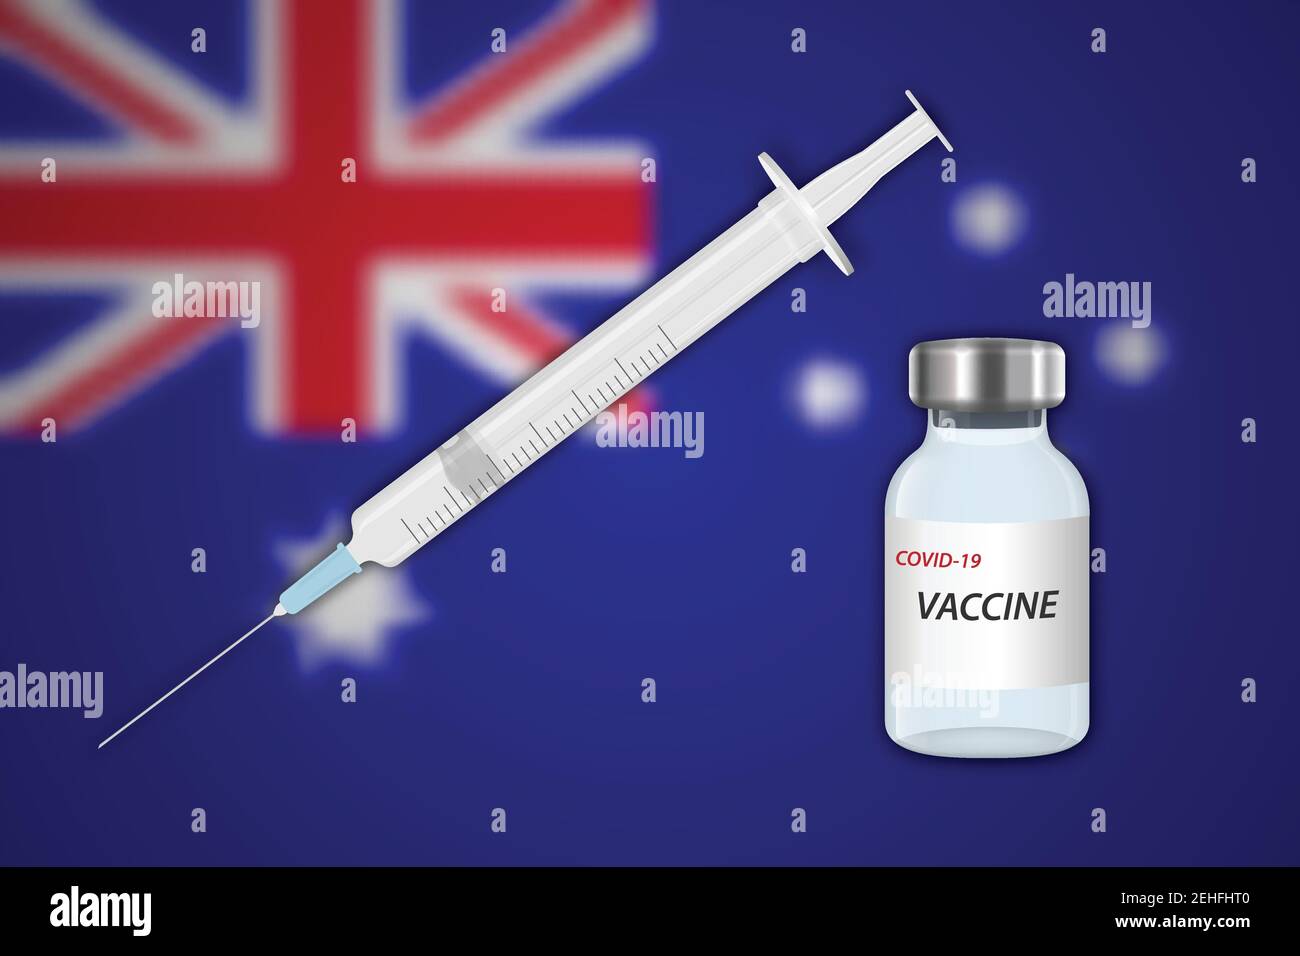 Syringe and vaccine vial on blur background with Australia flag, Template for vaccination banner Stock Vector